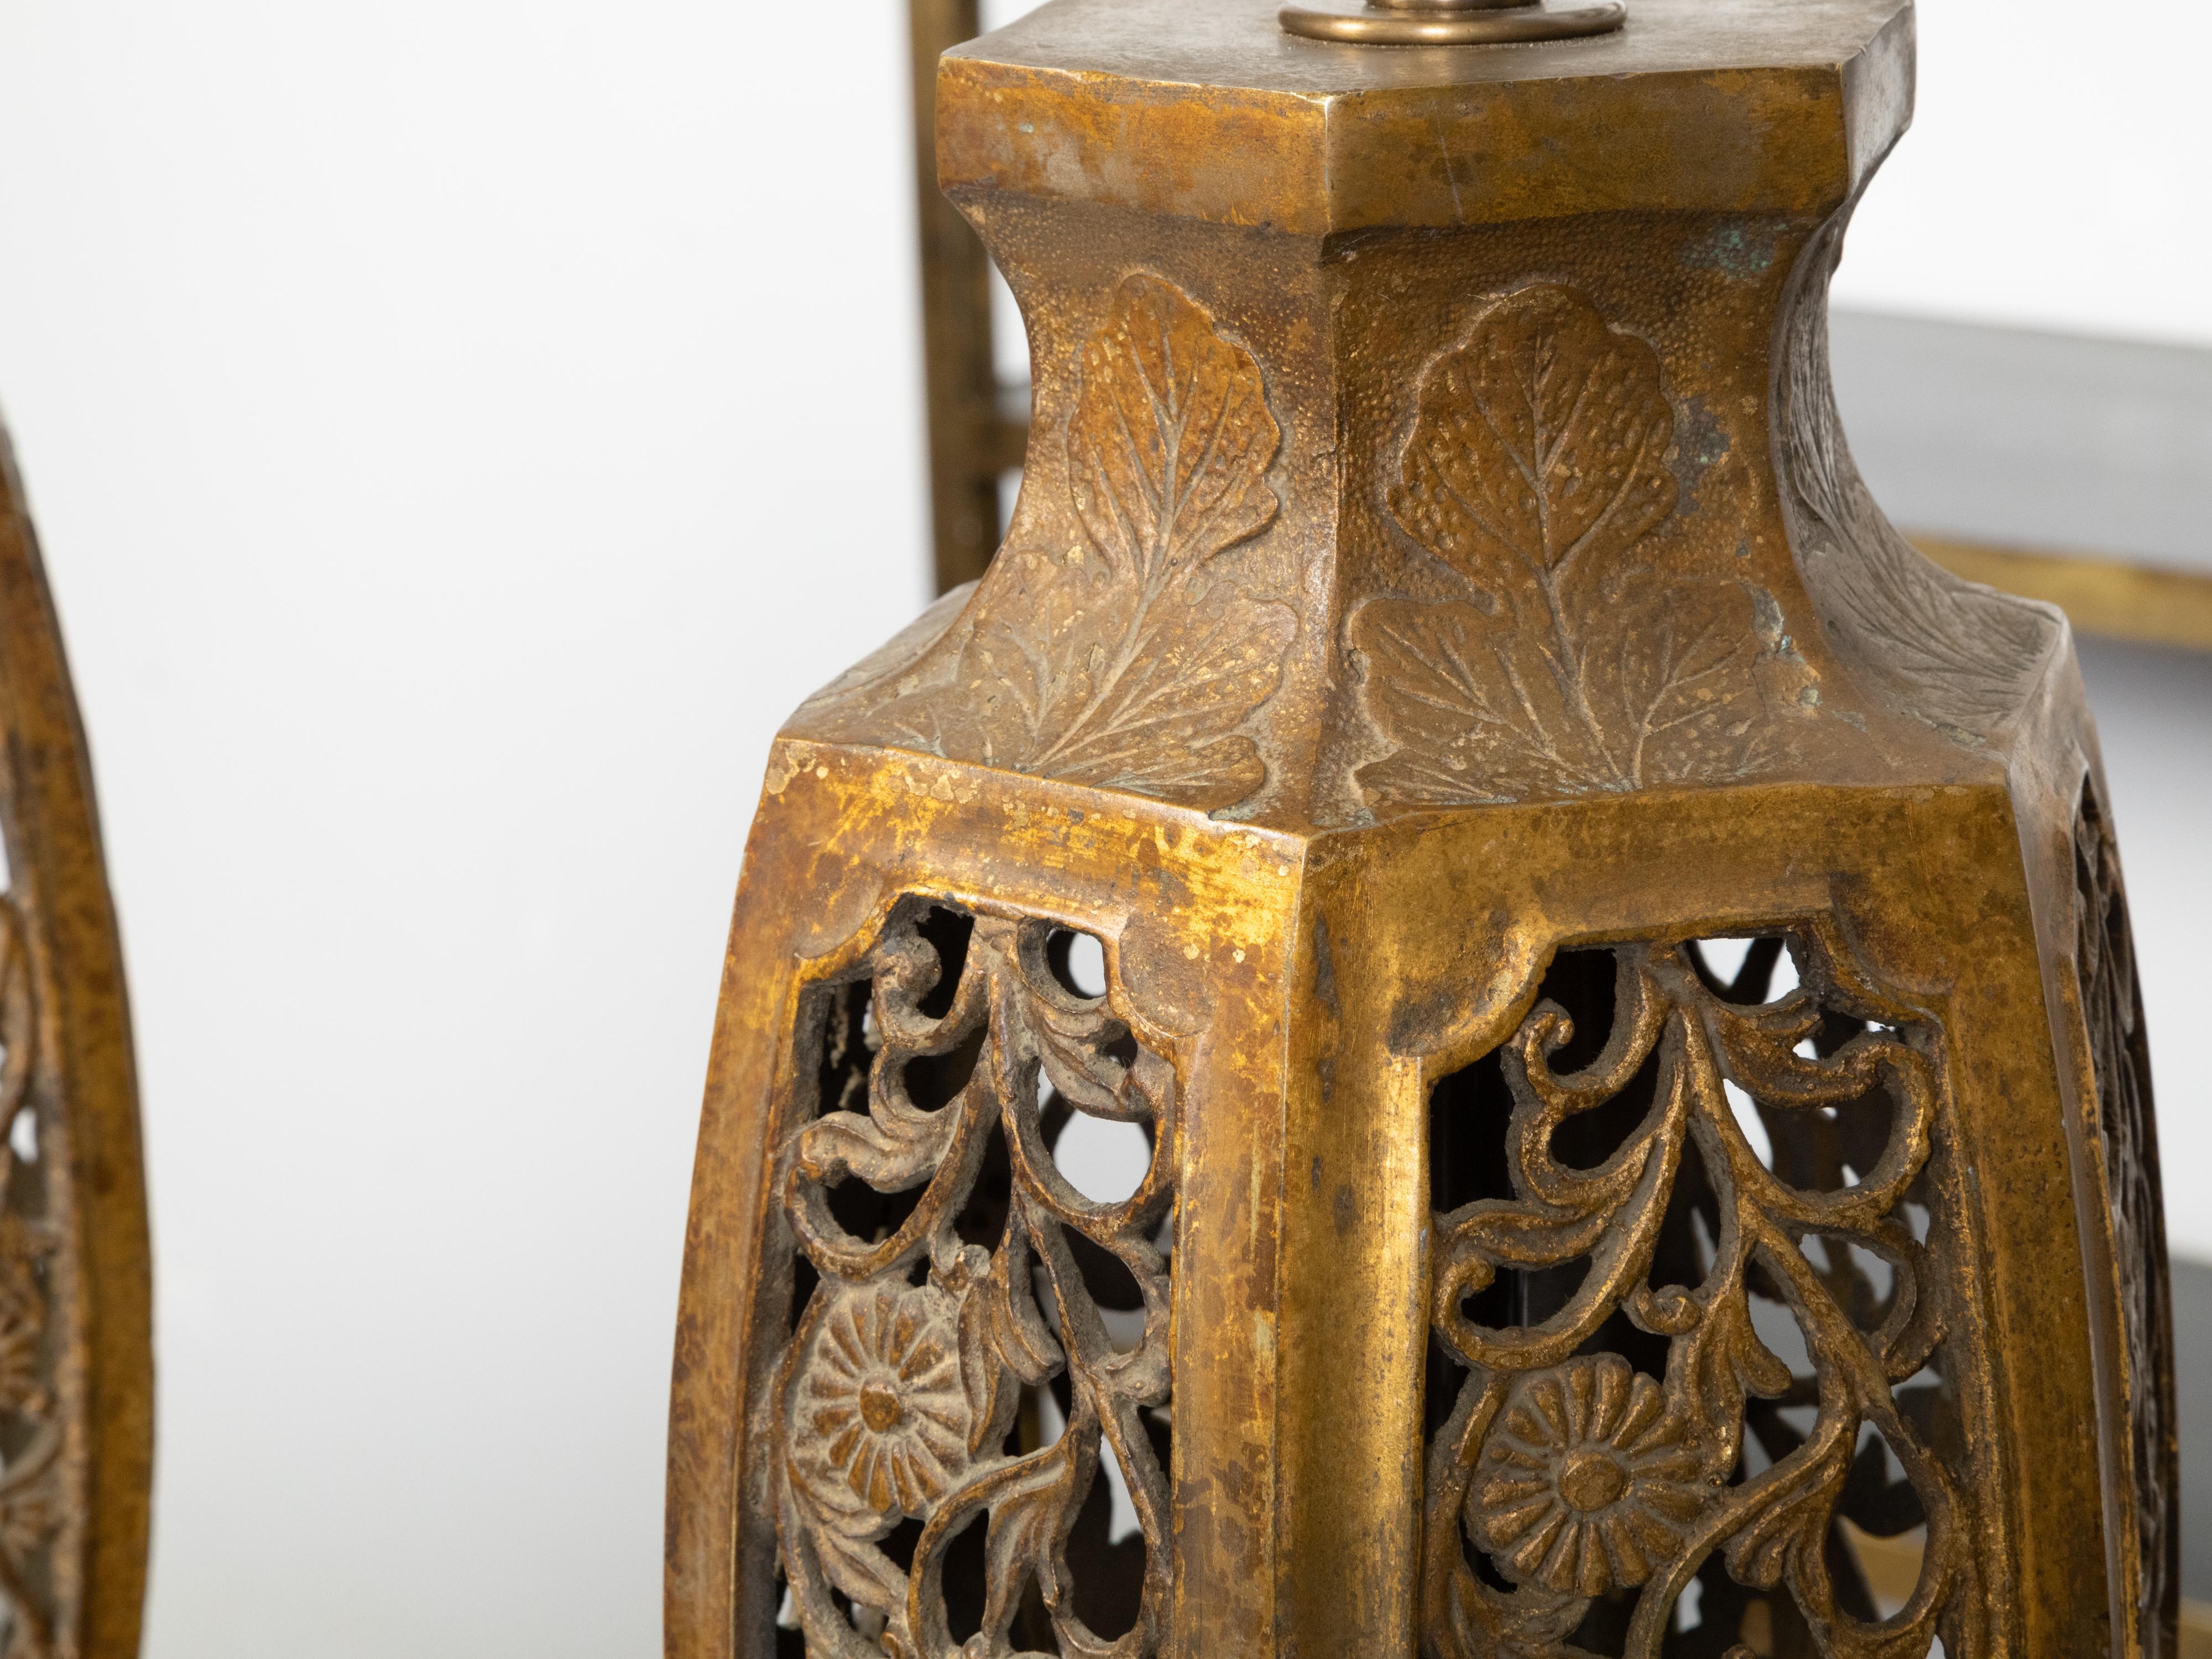 Pair of Asian MidCentury Us-Wired Table Lamps with Carved Openwork Floral Motifs For Sale 1